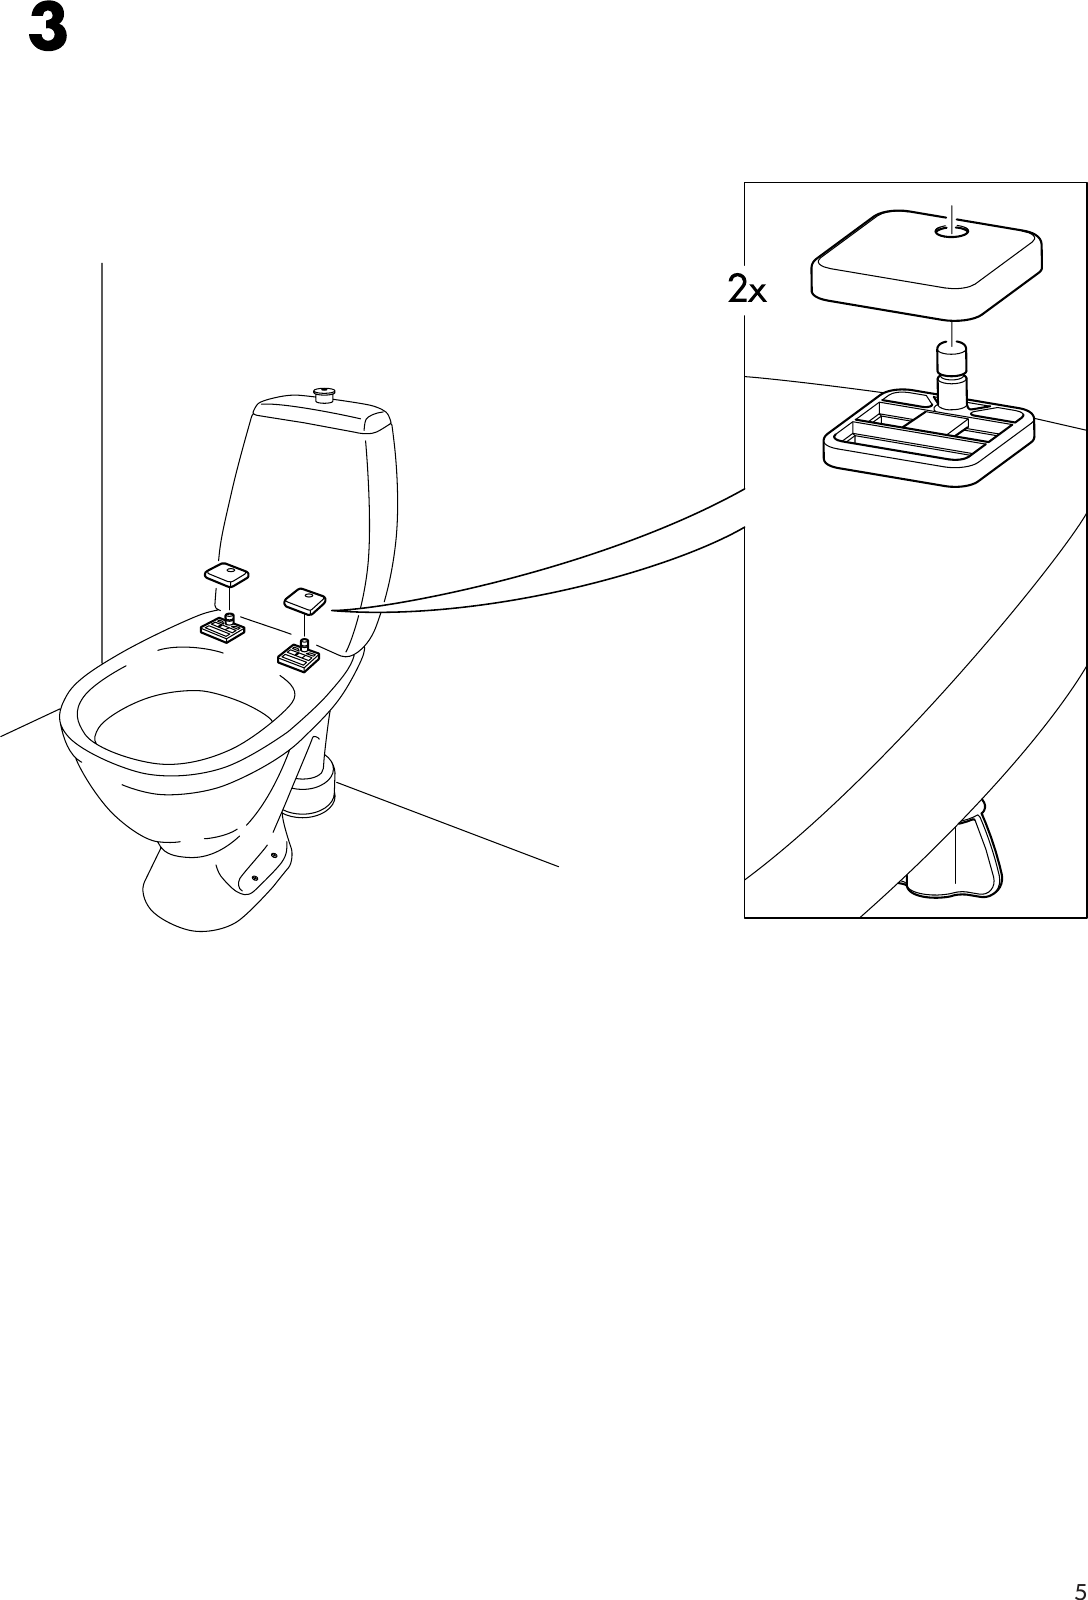 Page 5 of 8 - Ikea Ikea-Freden-Toilet-Seat-Assembly-Instruction